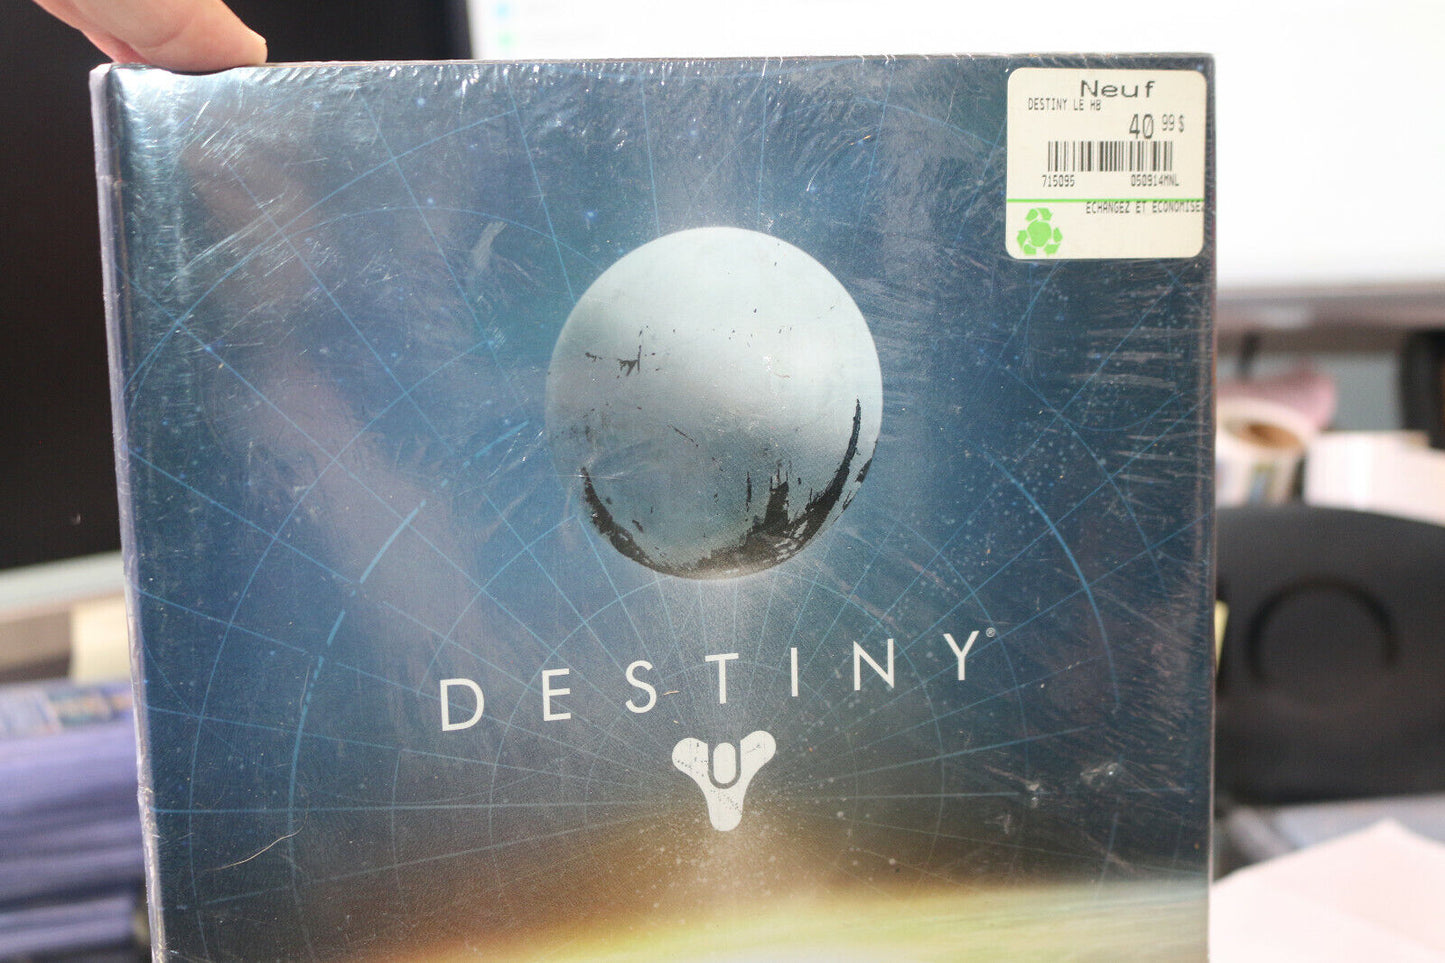 Destiny Limited Edition Strategy Guide By Bradygames Staff (2014, Hardcover)